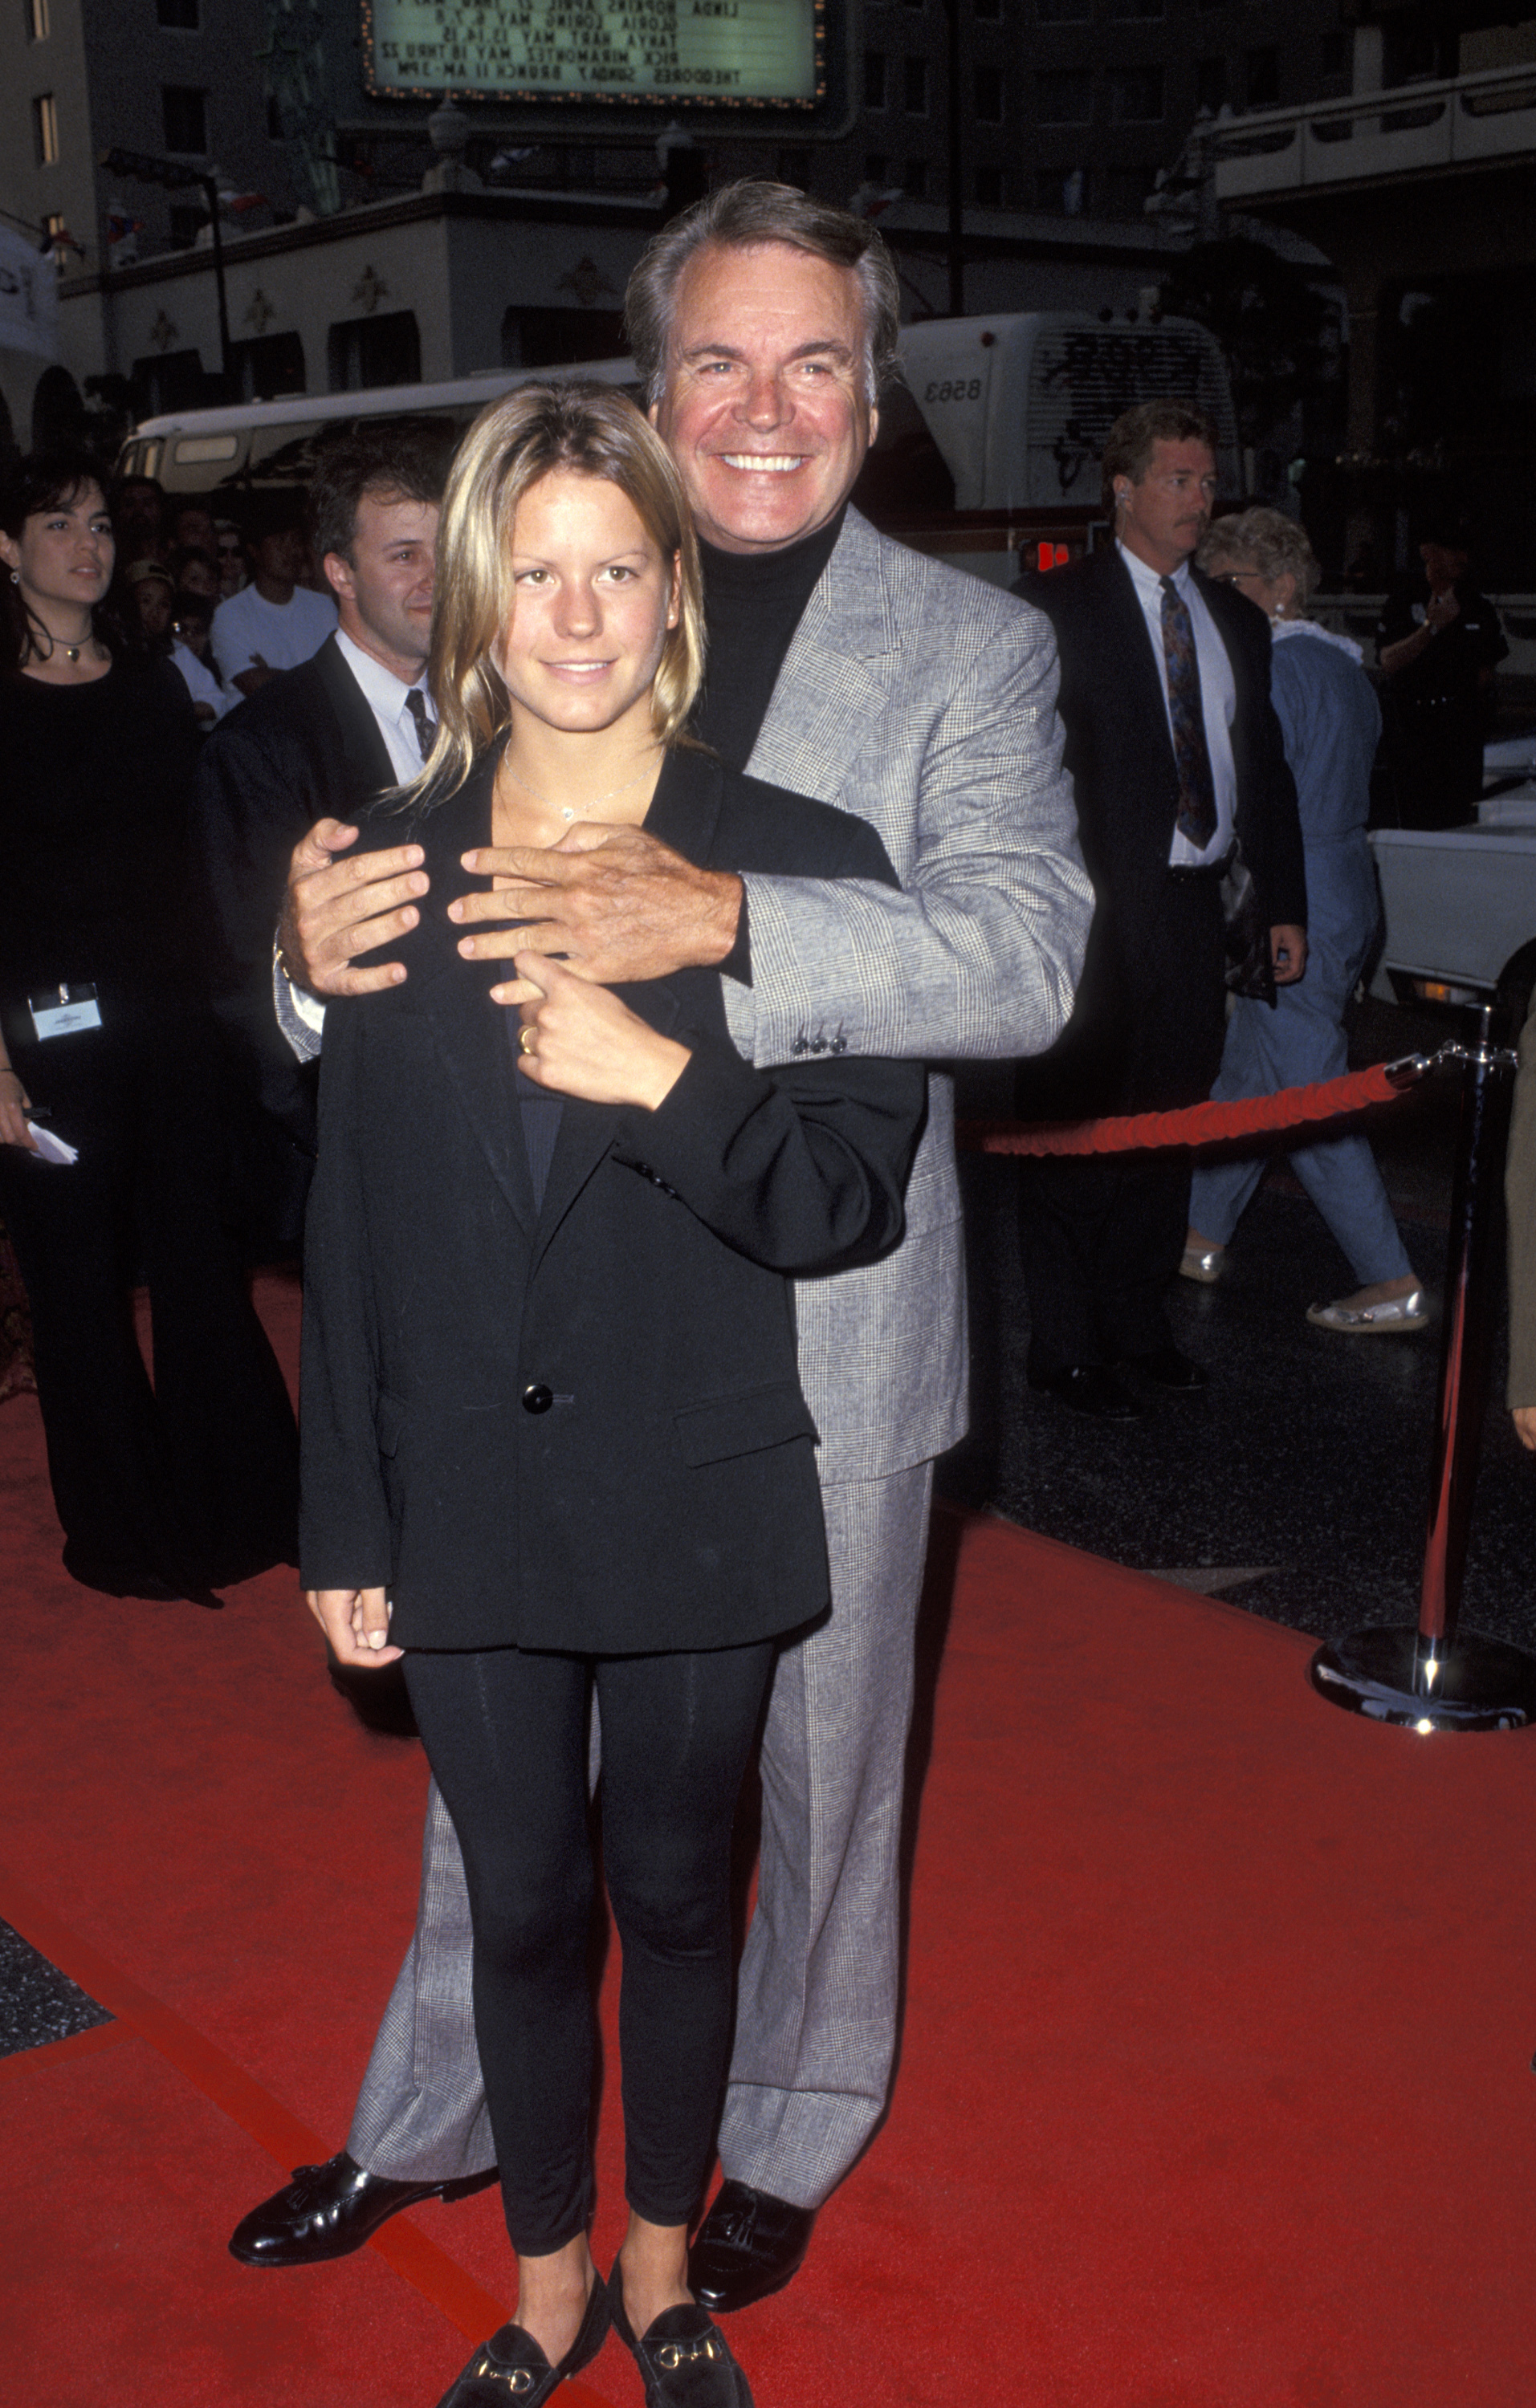 Courtney and her father Robert Wagner in California in 1993 | Source: Getty Images